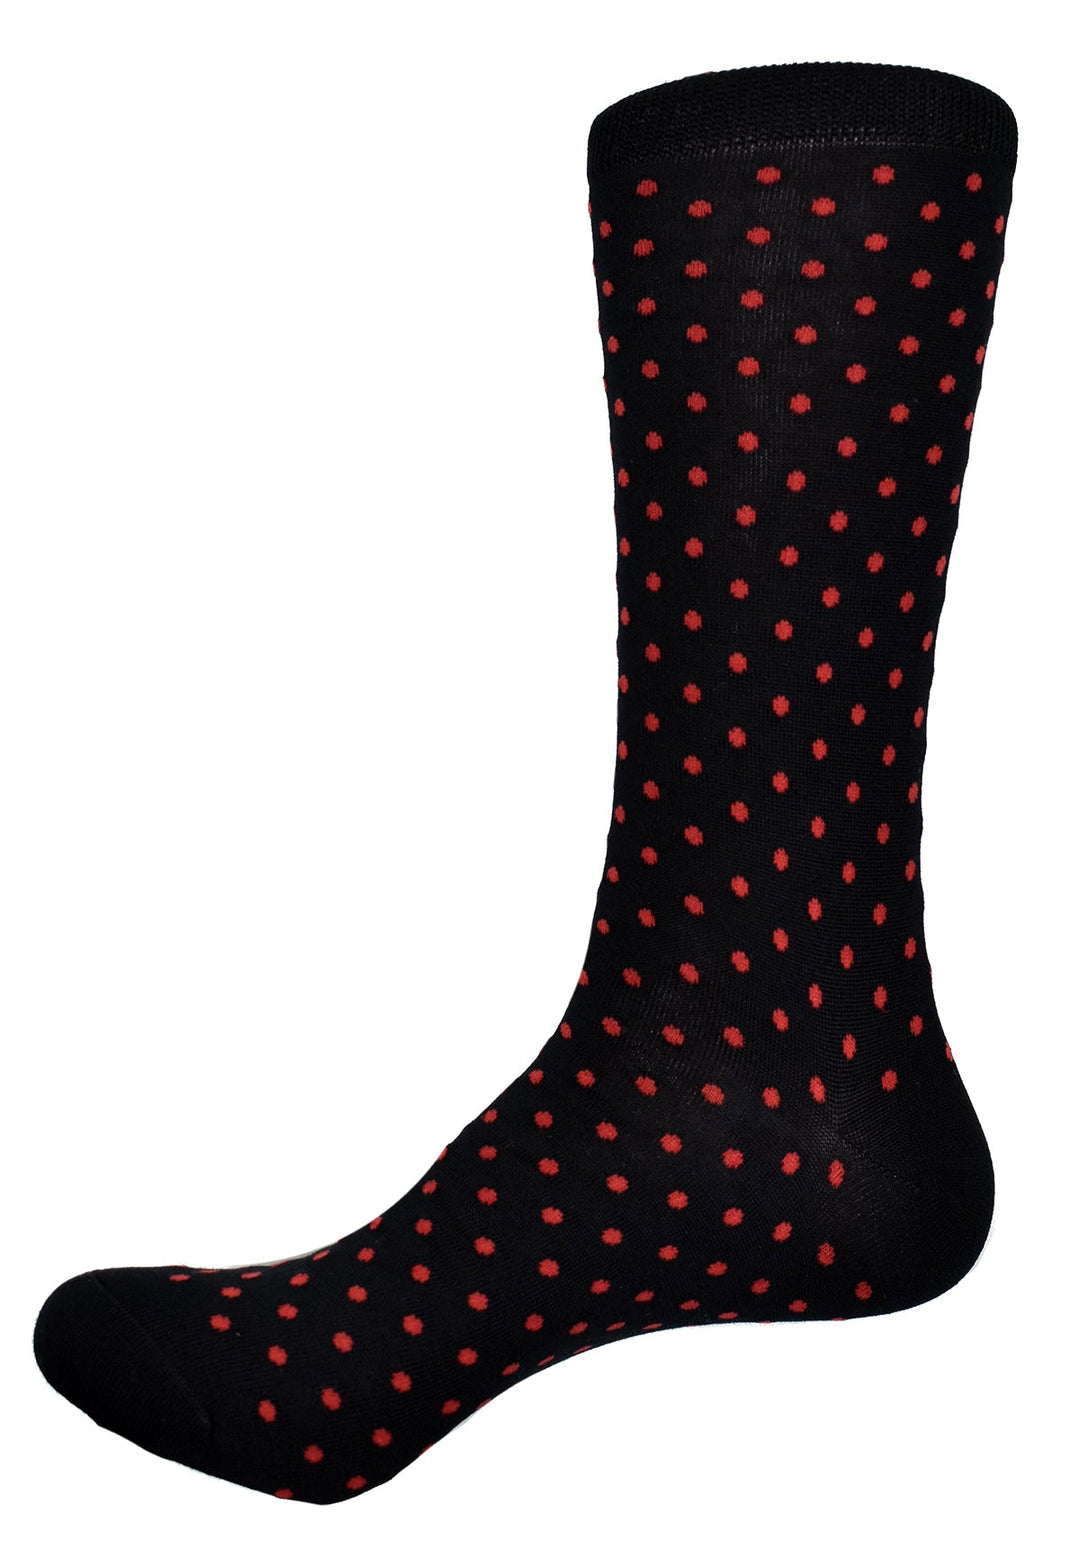 Soft cotton mid calf sock with a uniformly spaces eighth inch dot pattern.  Perfect for adding style to a basic sock or with dress pants.  Black ground with a red dot.   Fits sizes 9-12.